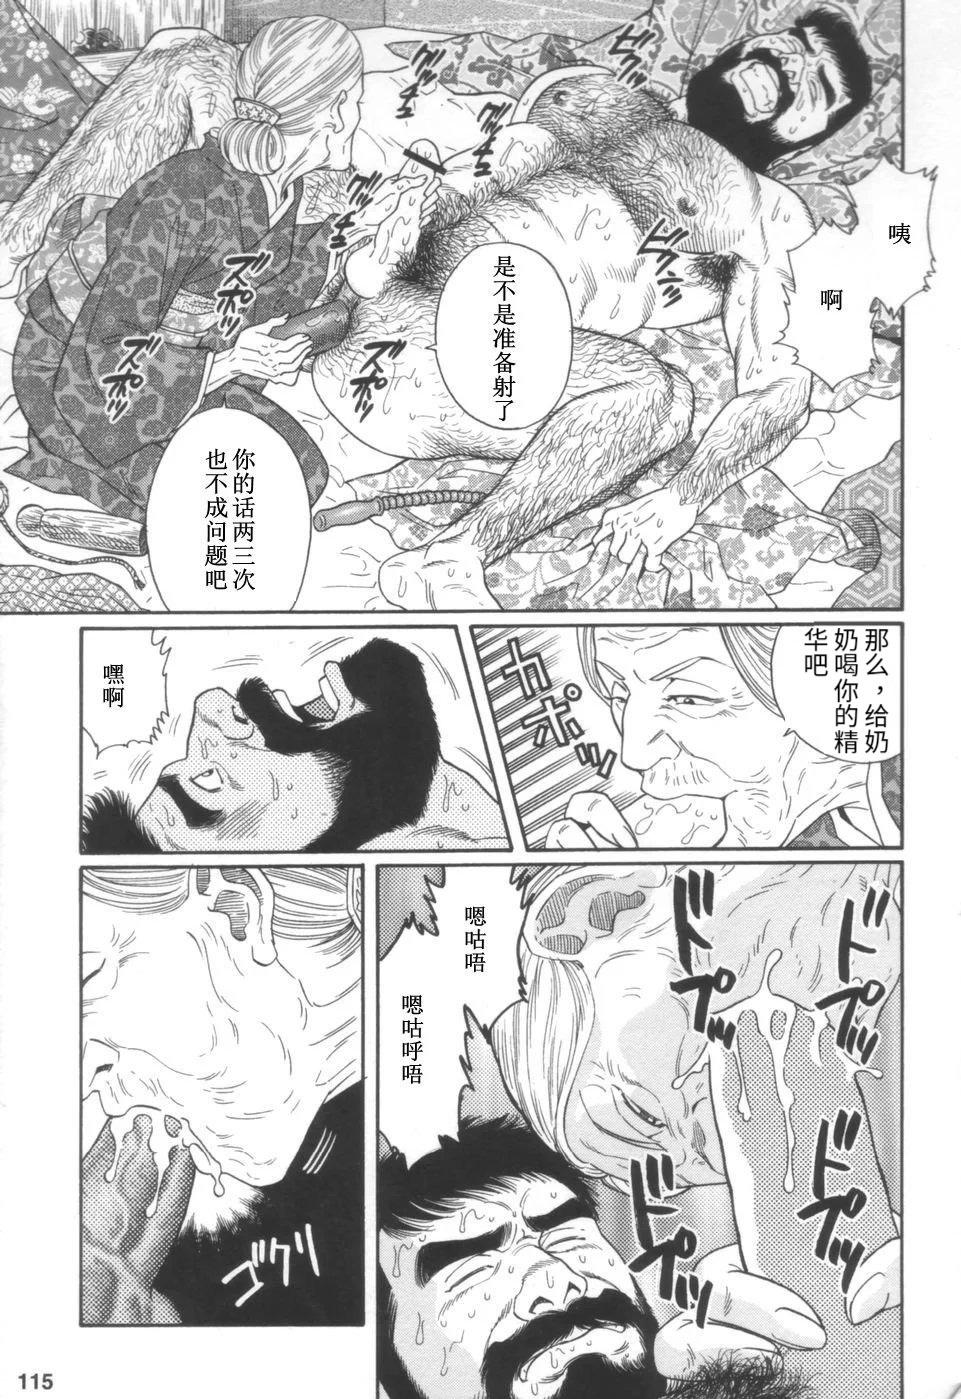 The Gedou no Ie Joukan | 邪道之家 Vol. 1 Ch.4 Leaked - Page 9